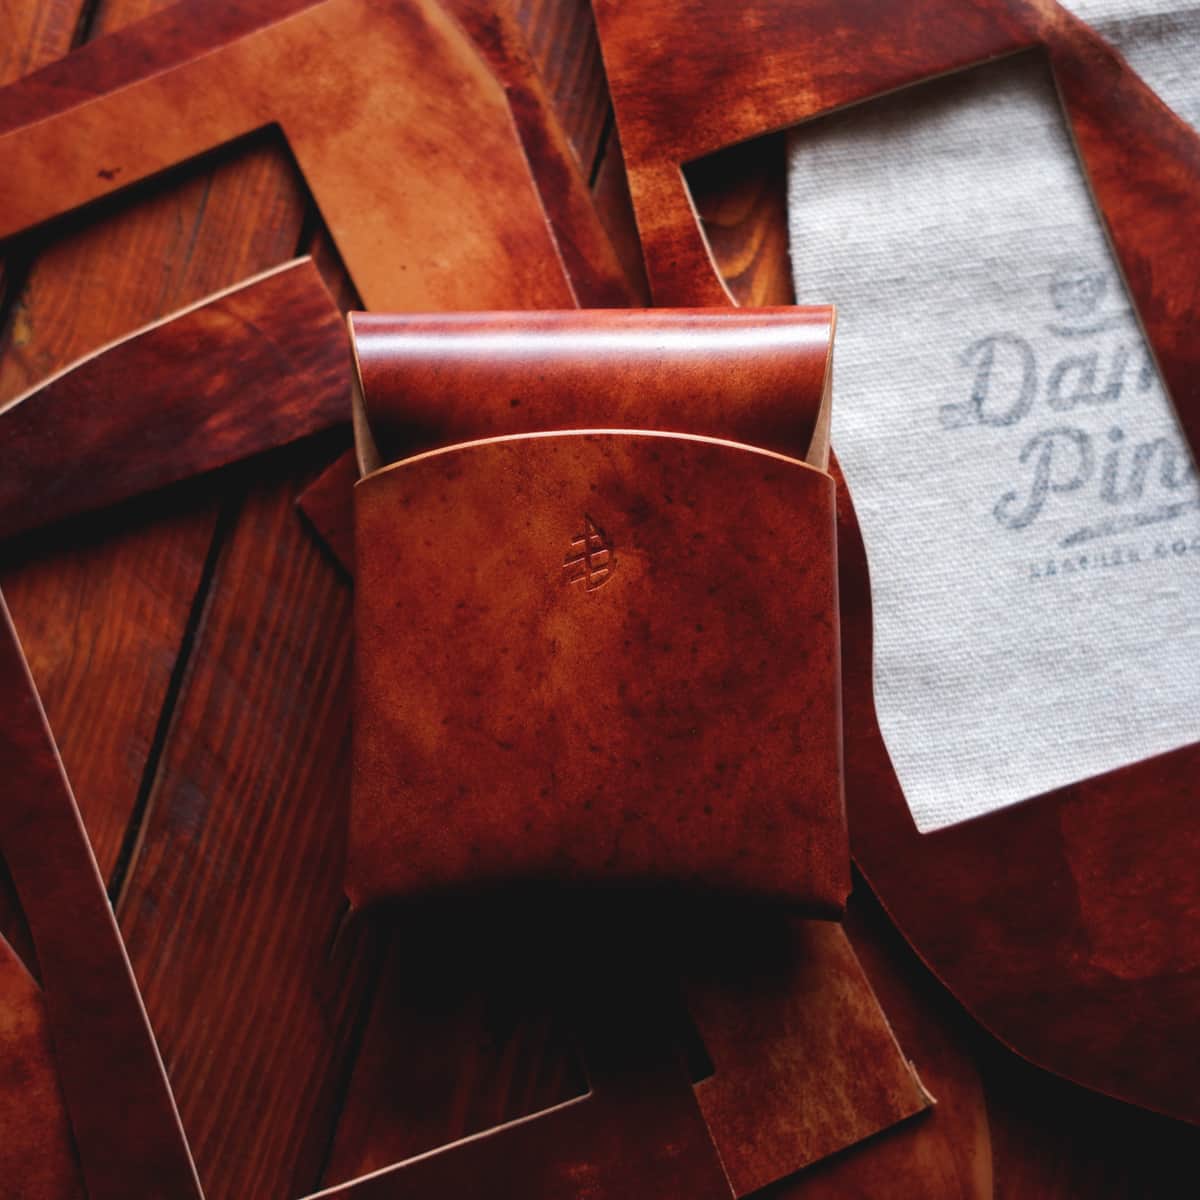 The Lodgepole Stitchless Wallet in Cognac Marbled Shell Cordovan leather